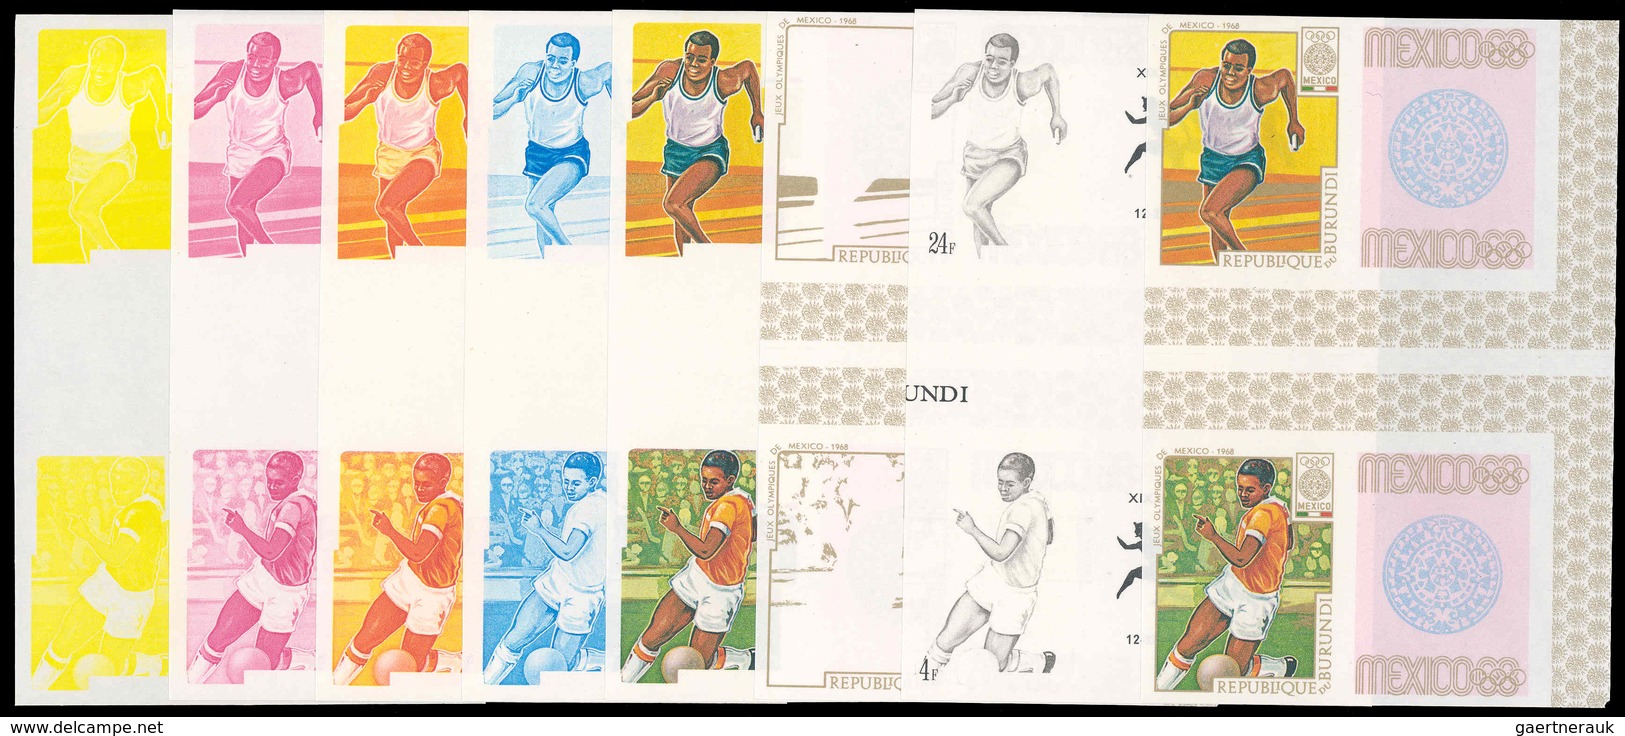 Thematik: Olympische Spiele / olympic games: 1964/1992. Great accumulation with different kinds of P